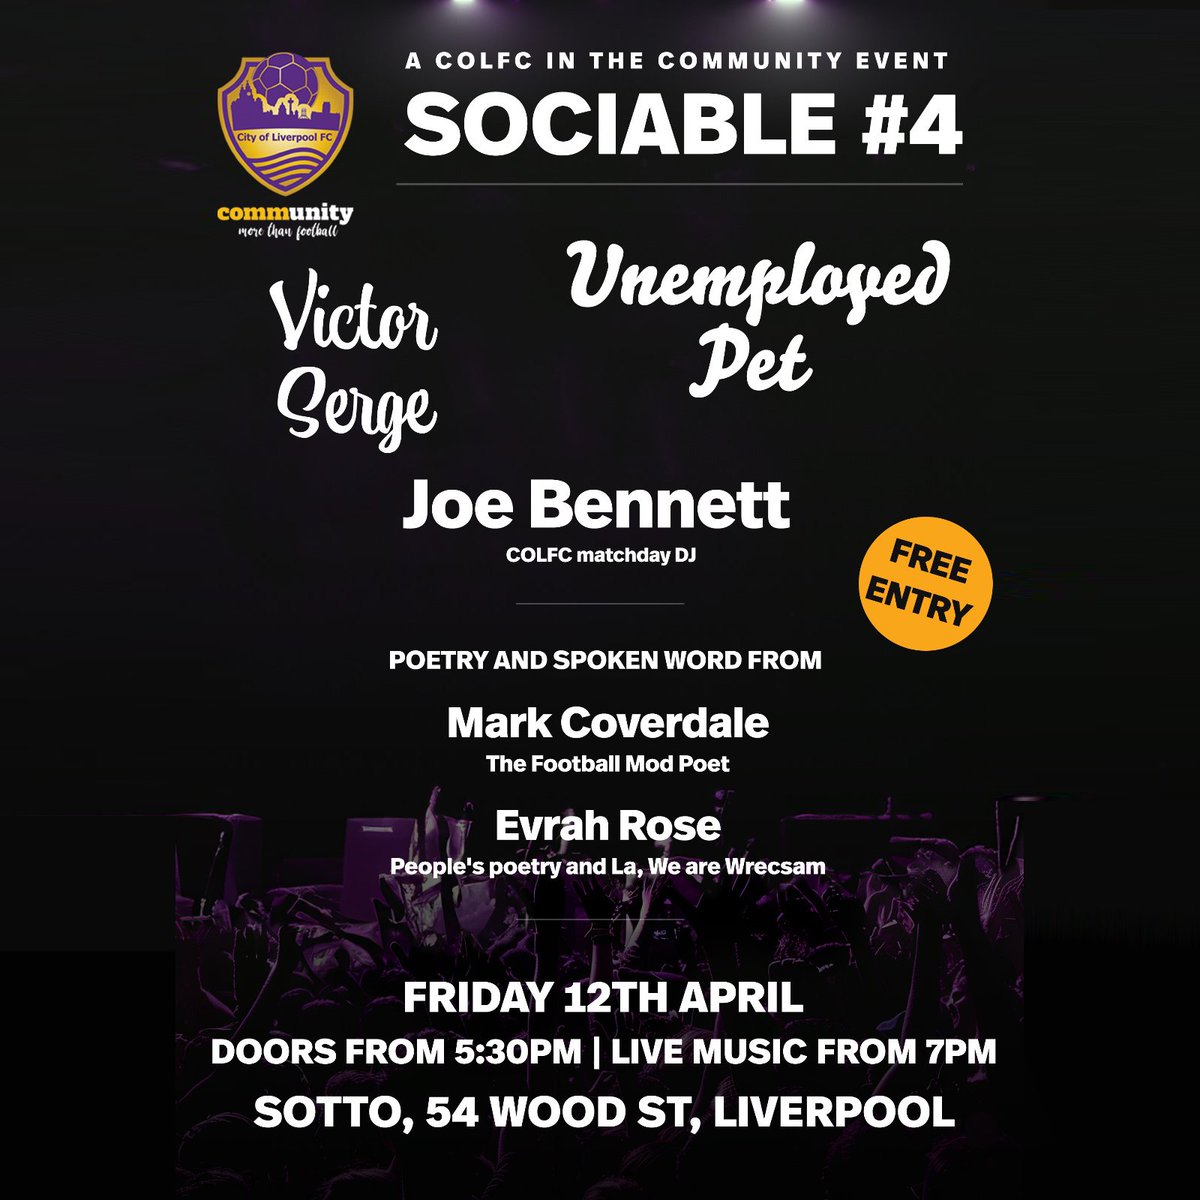 Gig! Next Friday. Football. Poetry. Music. Socialism. Community. It's all so very Liverpool innit? Add to that the exacting rhymes of the ever-awesome @evrahrose + tunes from the fine folk @victorsergemus1 & Unemployed Pet and you've a class night out. Can't wait. See you there.